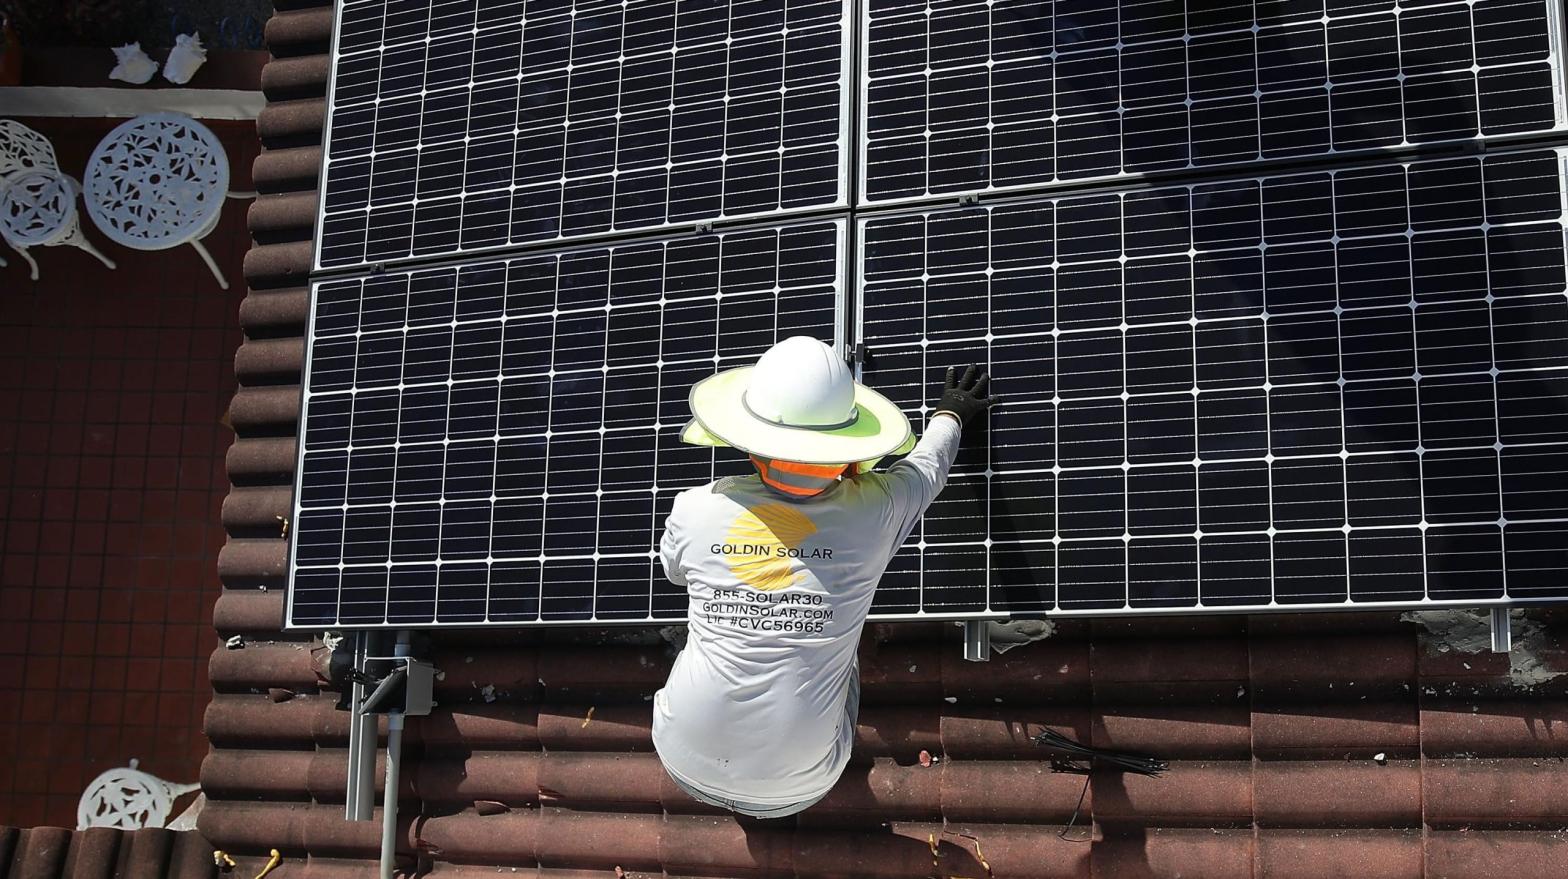 A worker installs a solar panel on a home in Palmetto Bay, Florida. (Photo: Joe Raedle, Getty Images)